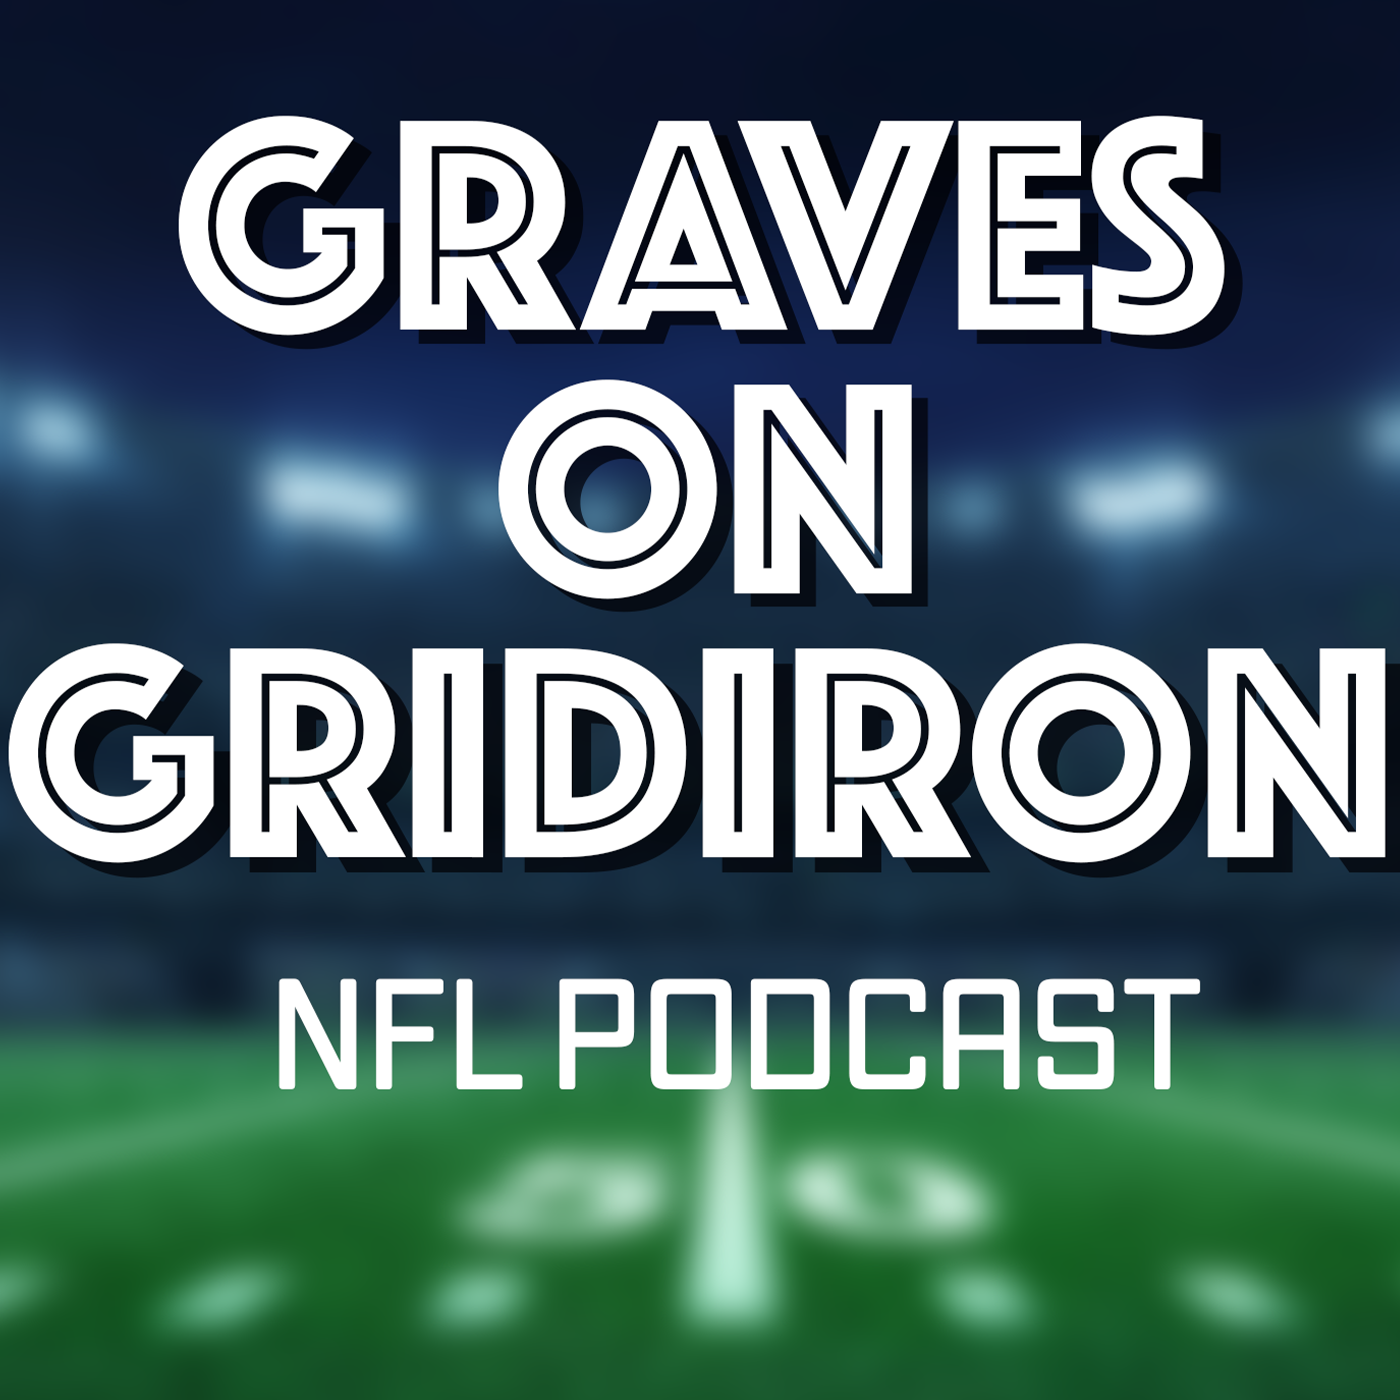 Graves On Gridiron - NFL Podcast